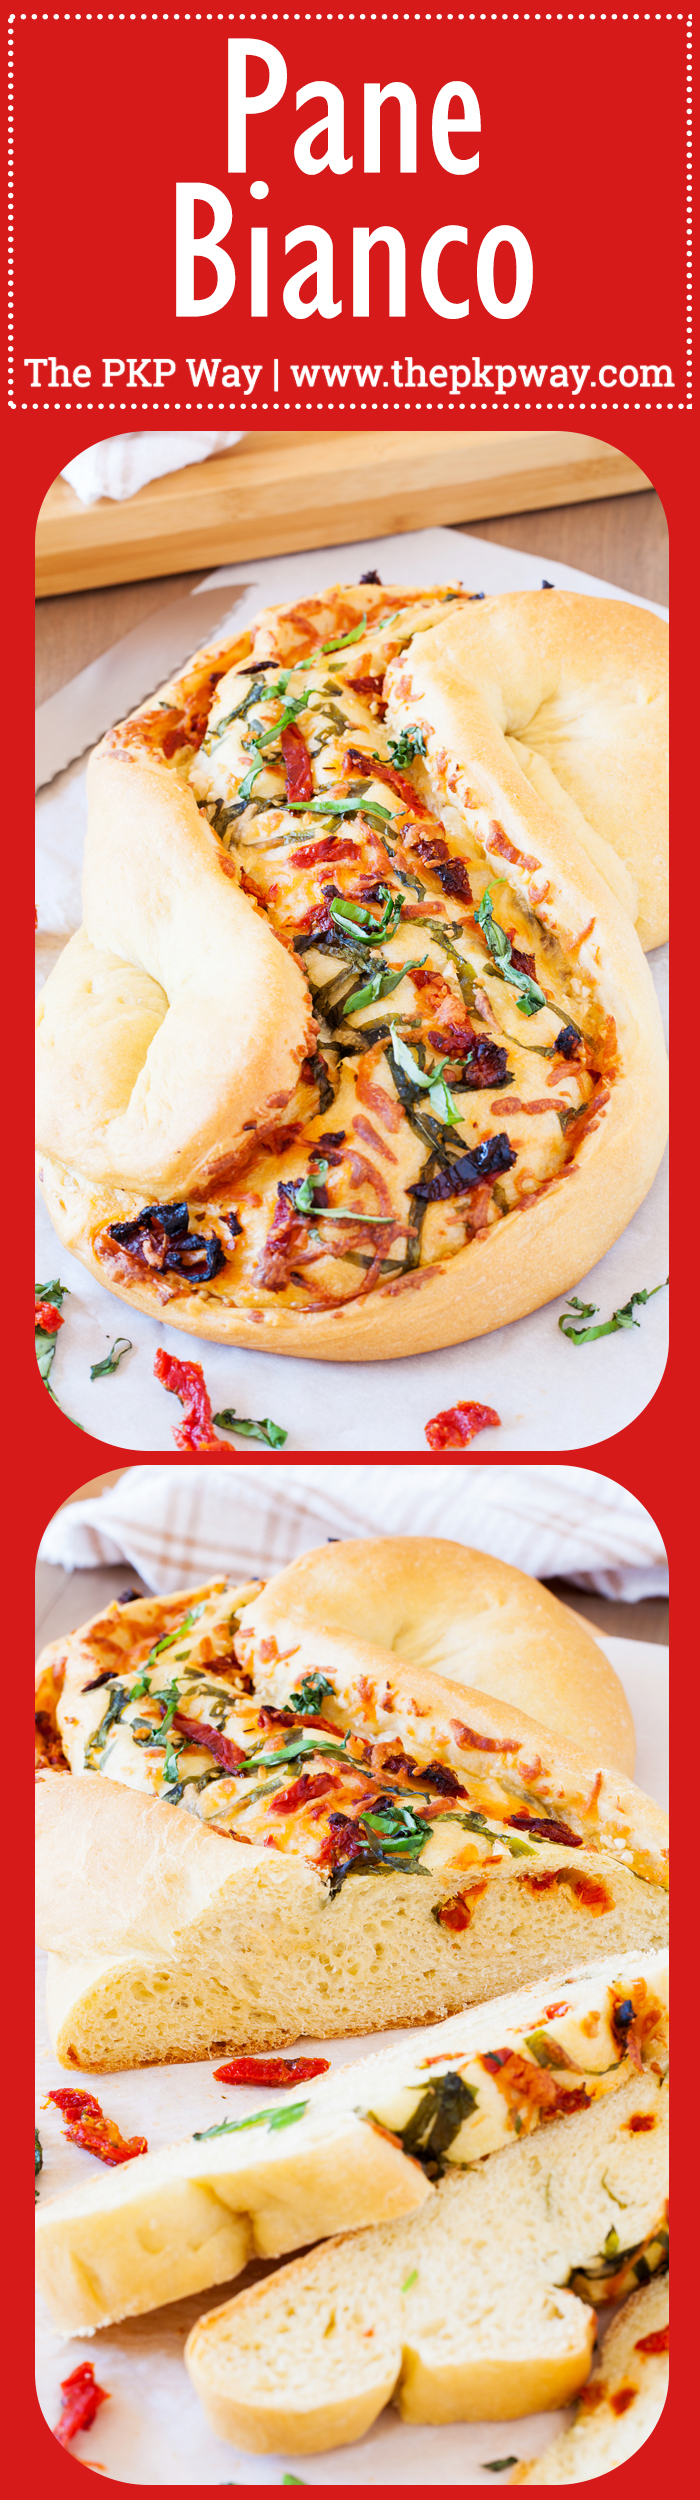 Great for bread baking beginners, this Pane Bianco (Italian for White Bread) is filled with sun-dried tomatoes, garlic, fresh basil, and mozzarella cheese, that will sure to impress.